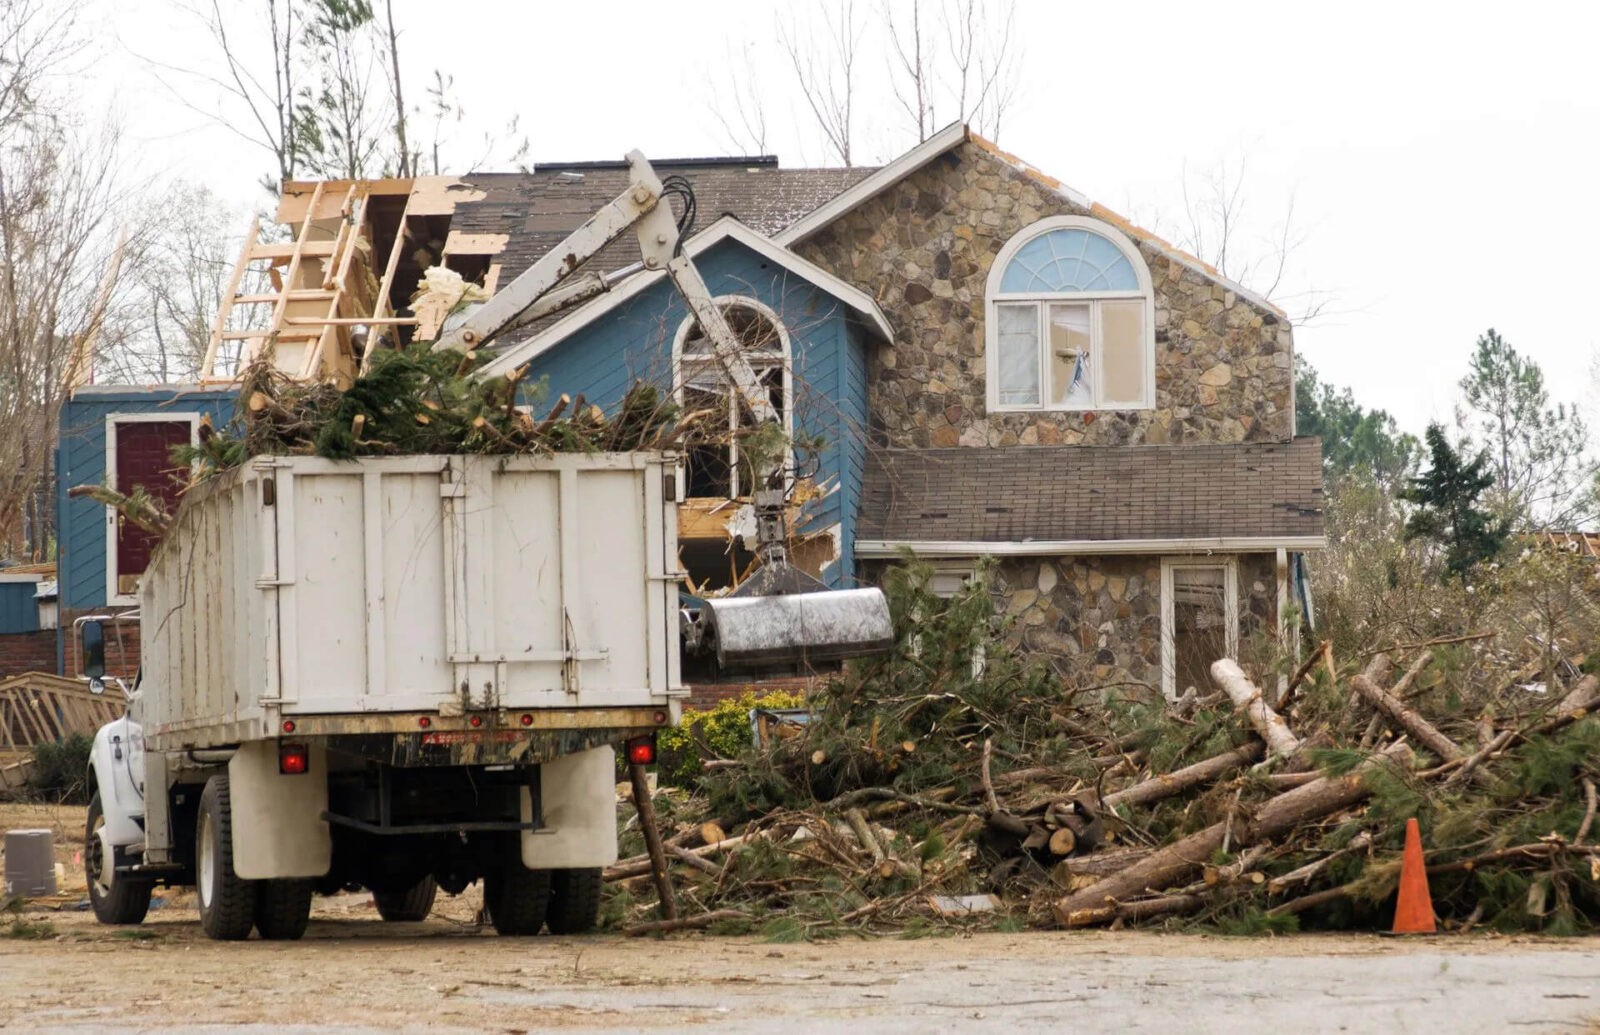 Damage Control Why You Should Let the Experts Handle Storm Aftermath